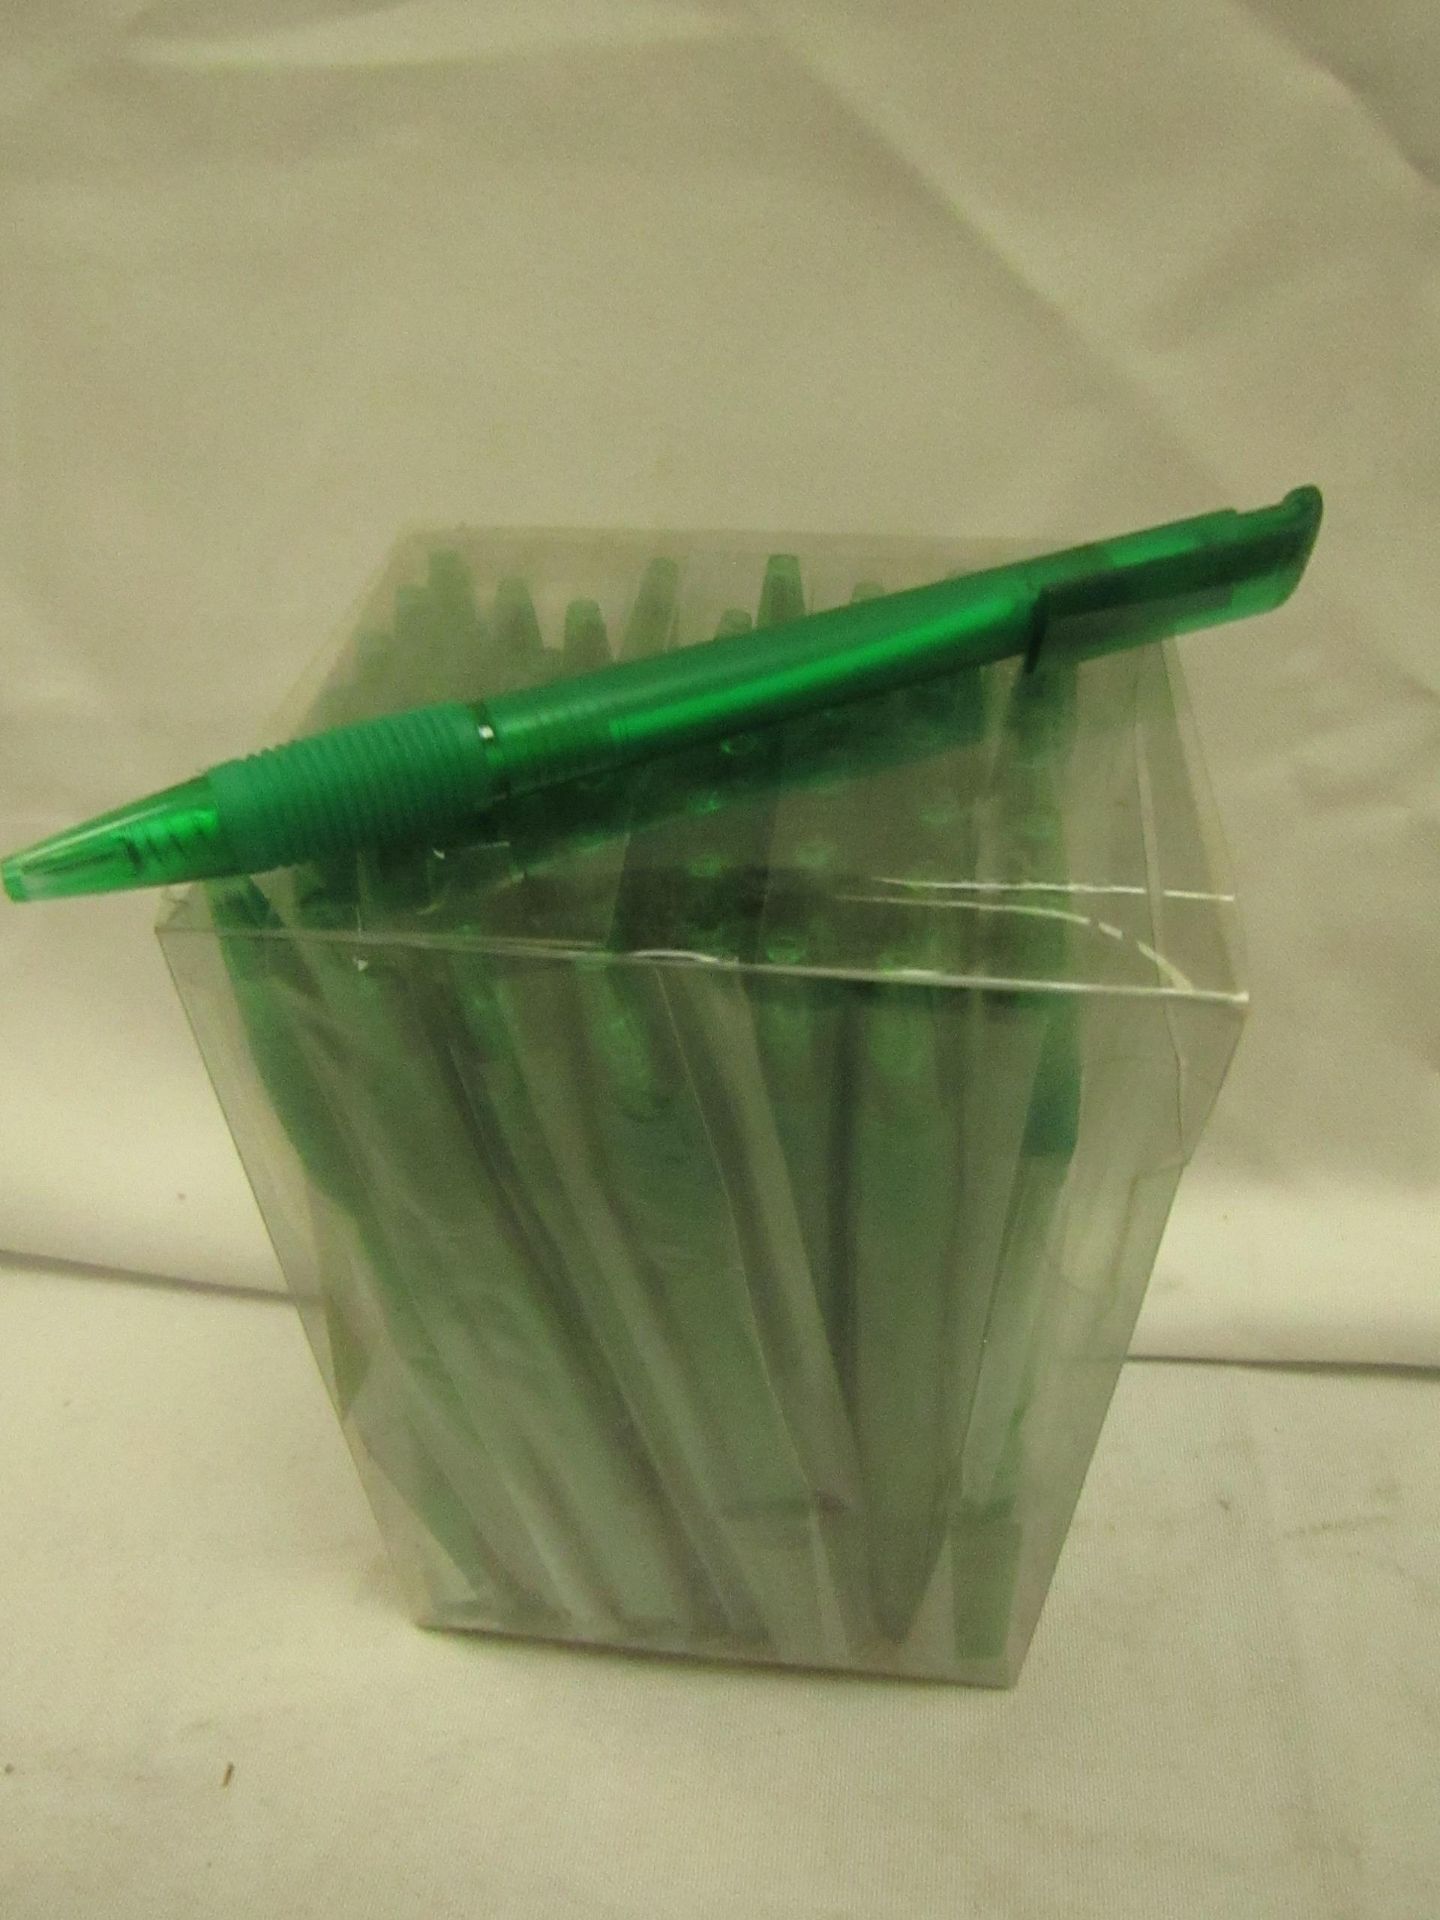 5x Erich Krause - Ball Point Pens (50 Pack) - All Unused & Packaged. (random check showed all